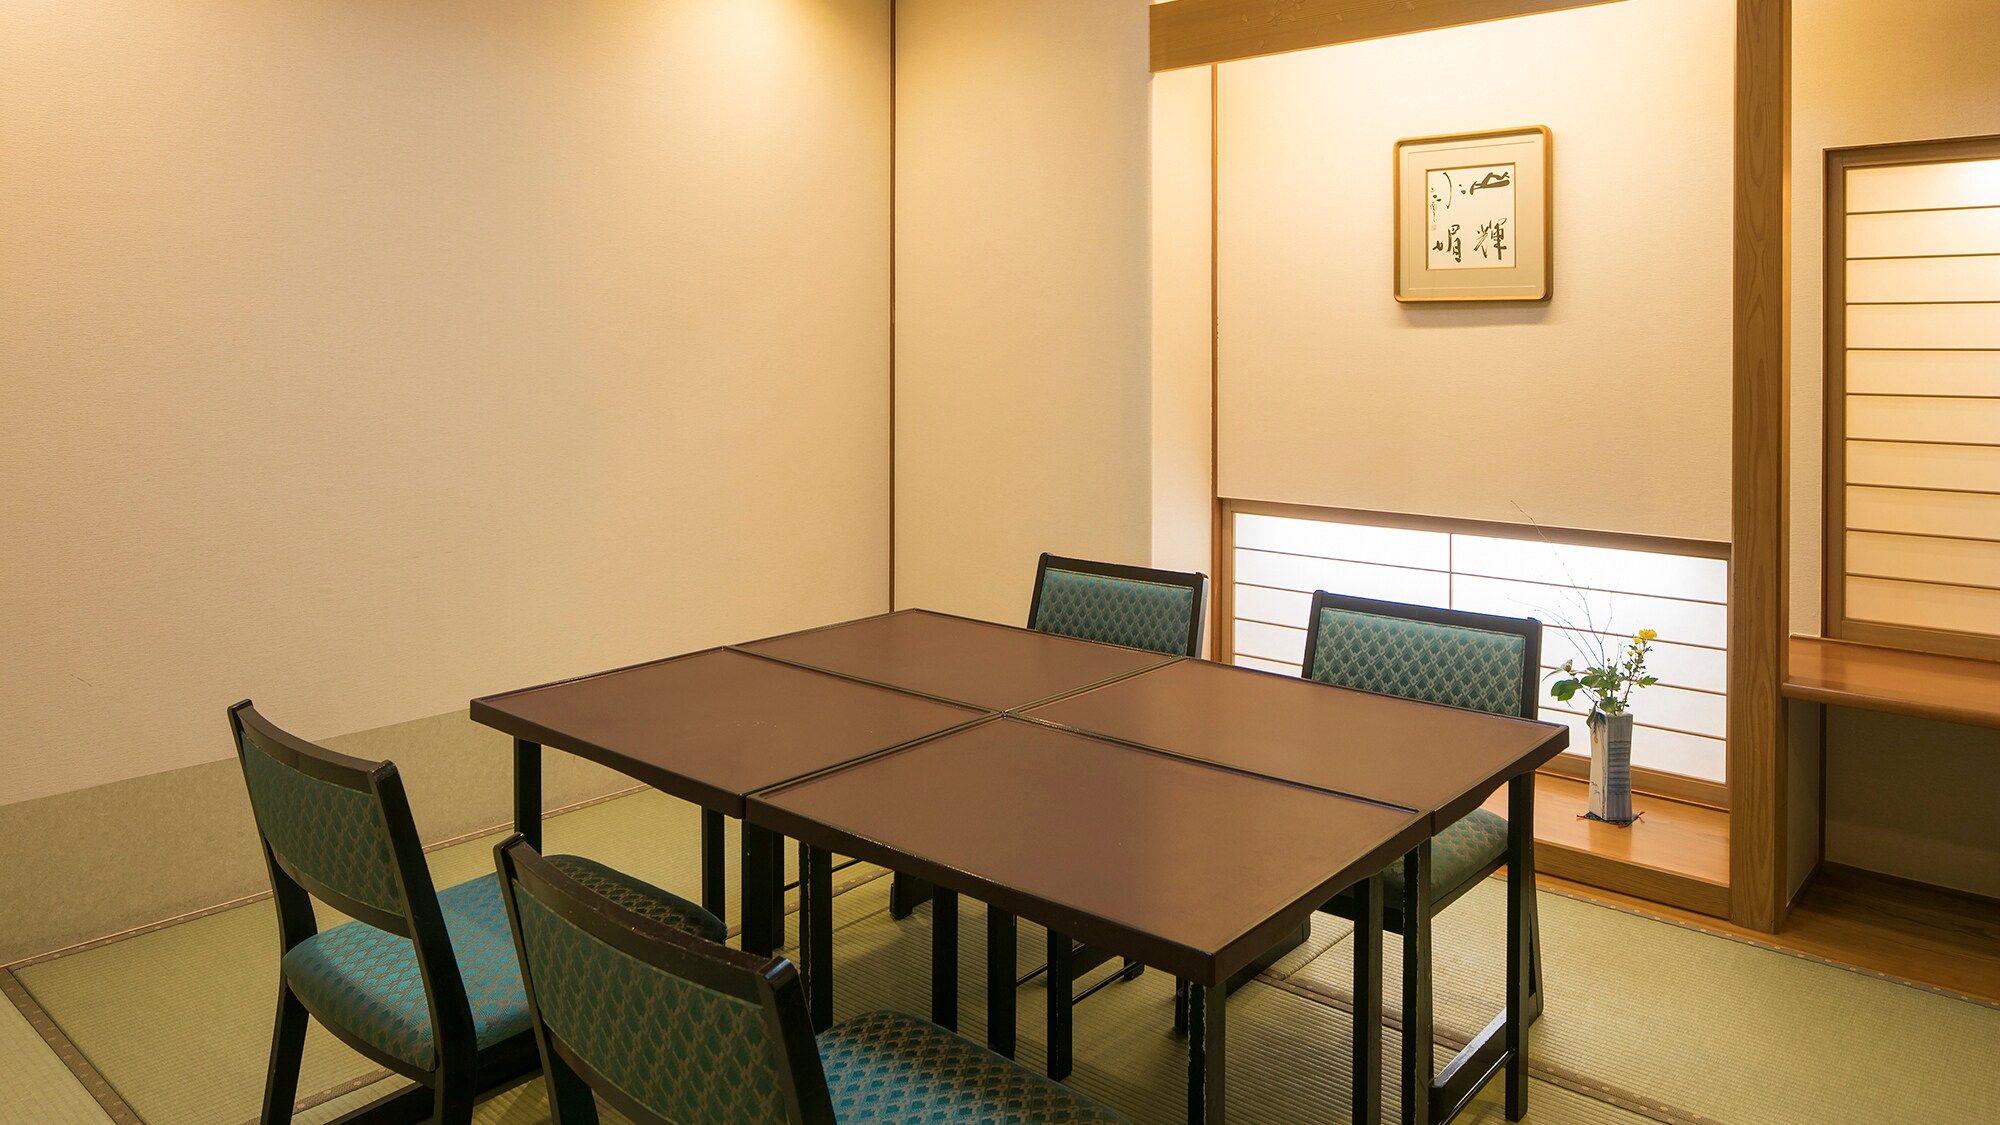 Reiwa 2nd year OPEN [-Bettei Hatsune Premium] Dining place: Private room